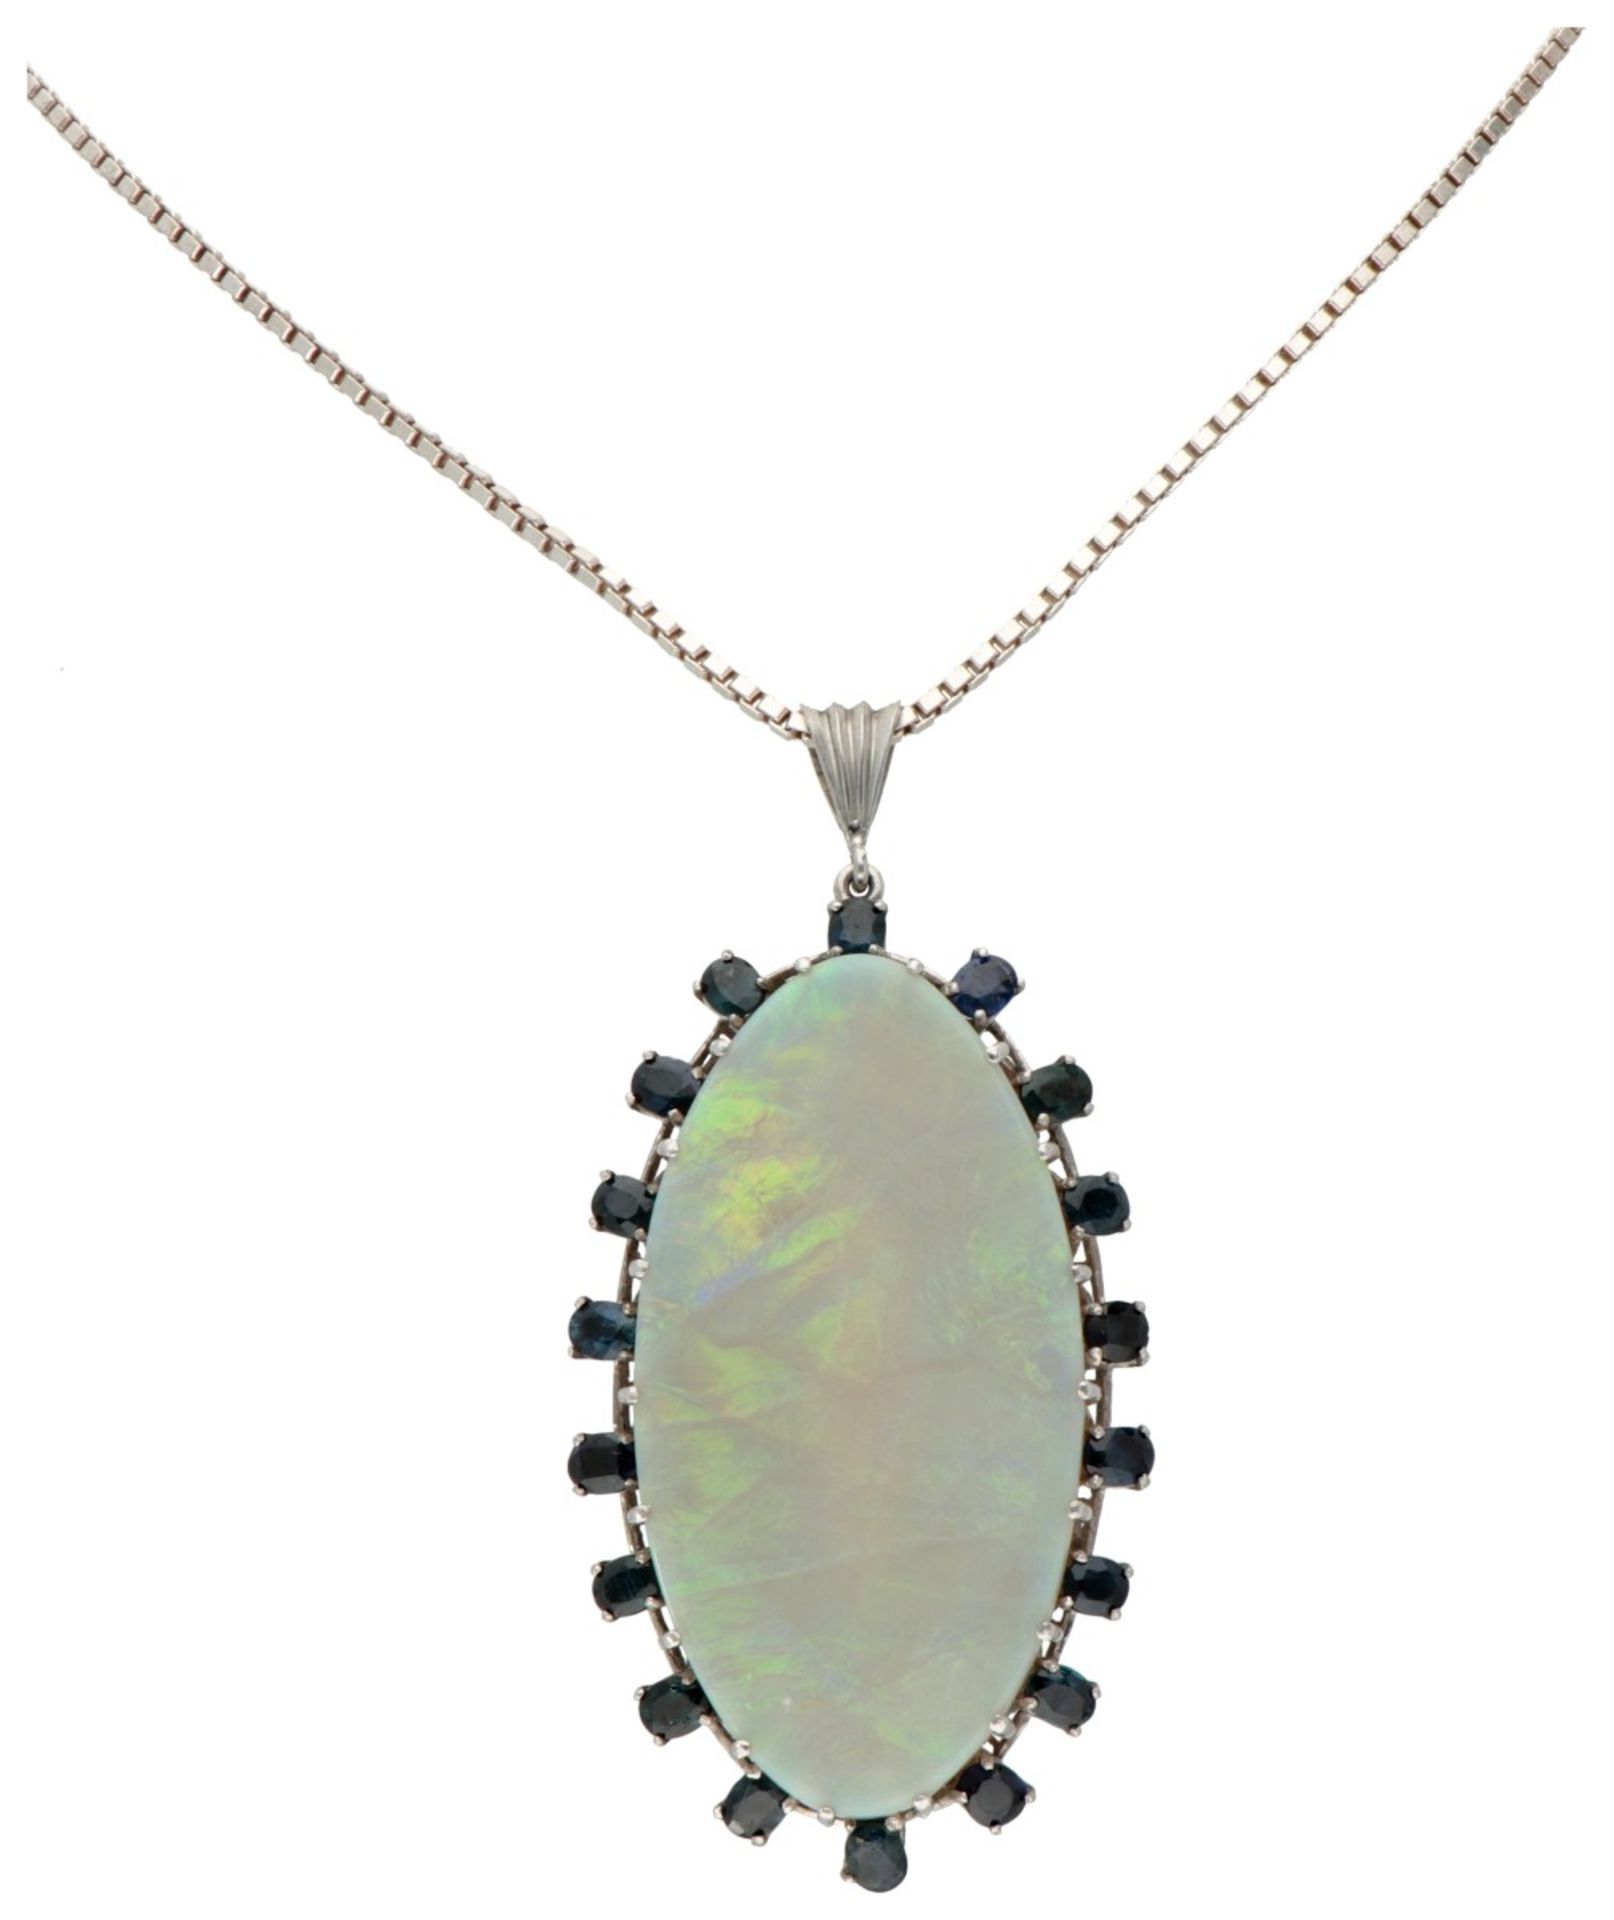 835 Silver necklace with pendant set with approx. 30.00 ct. precious opal and approx. 2.34 ct. natur